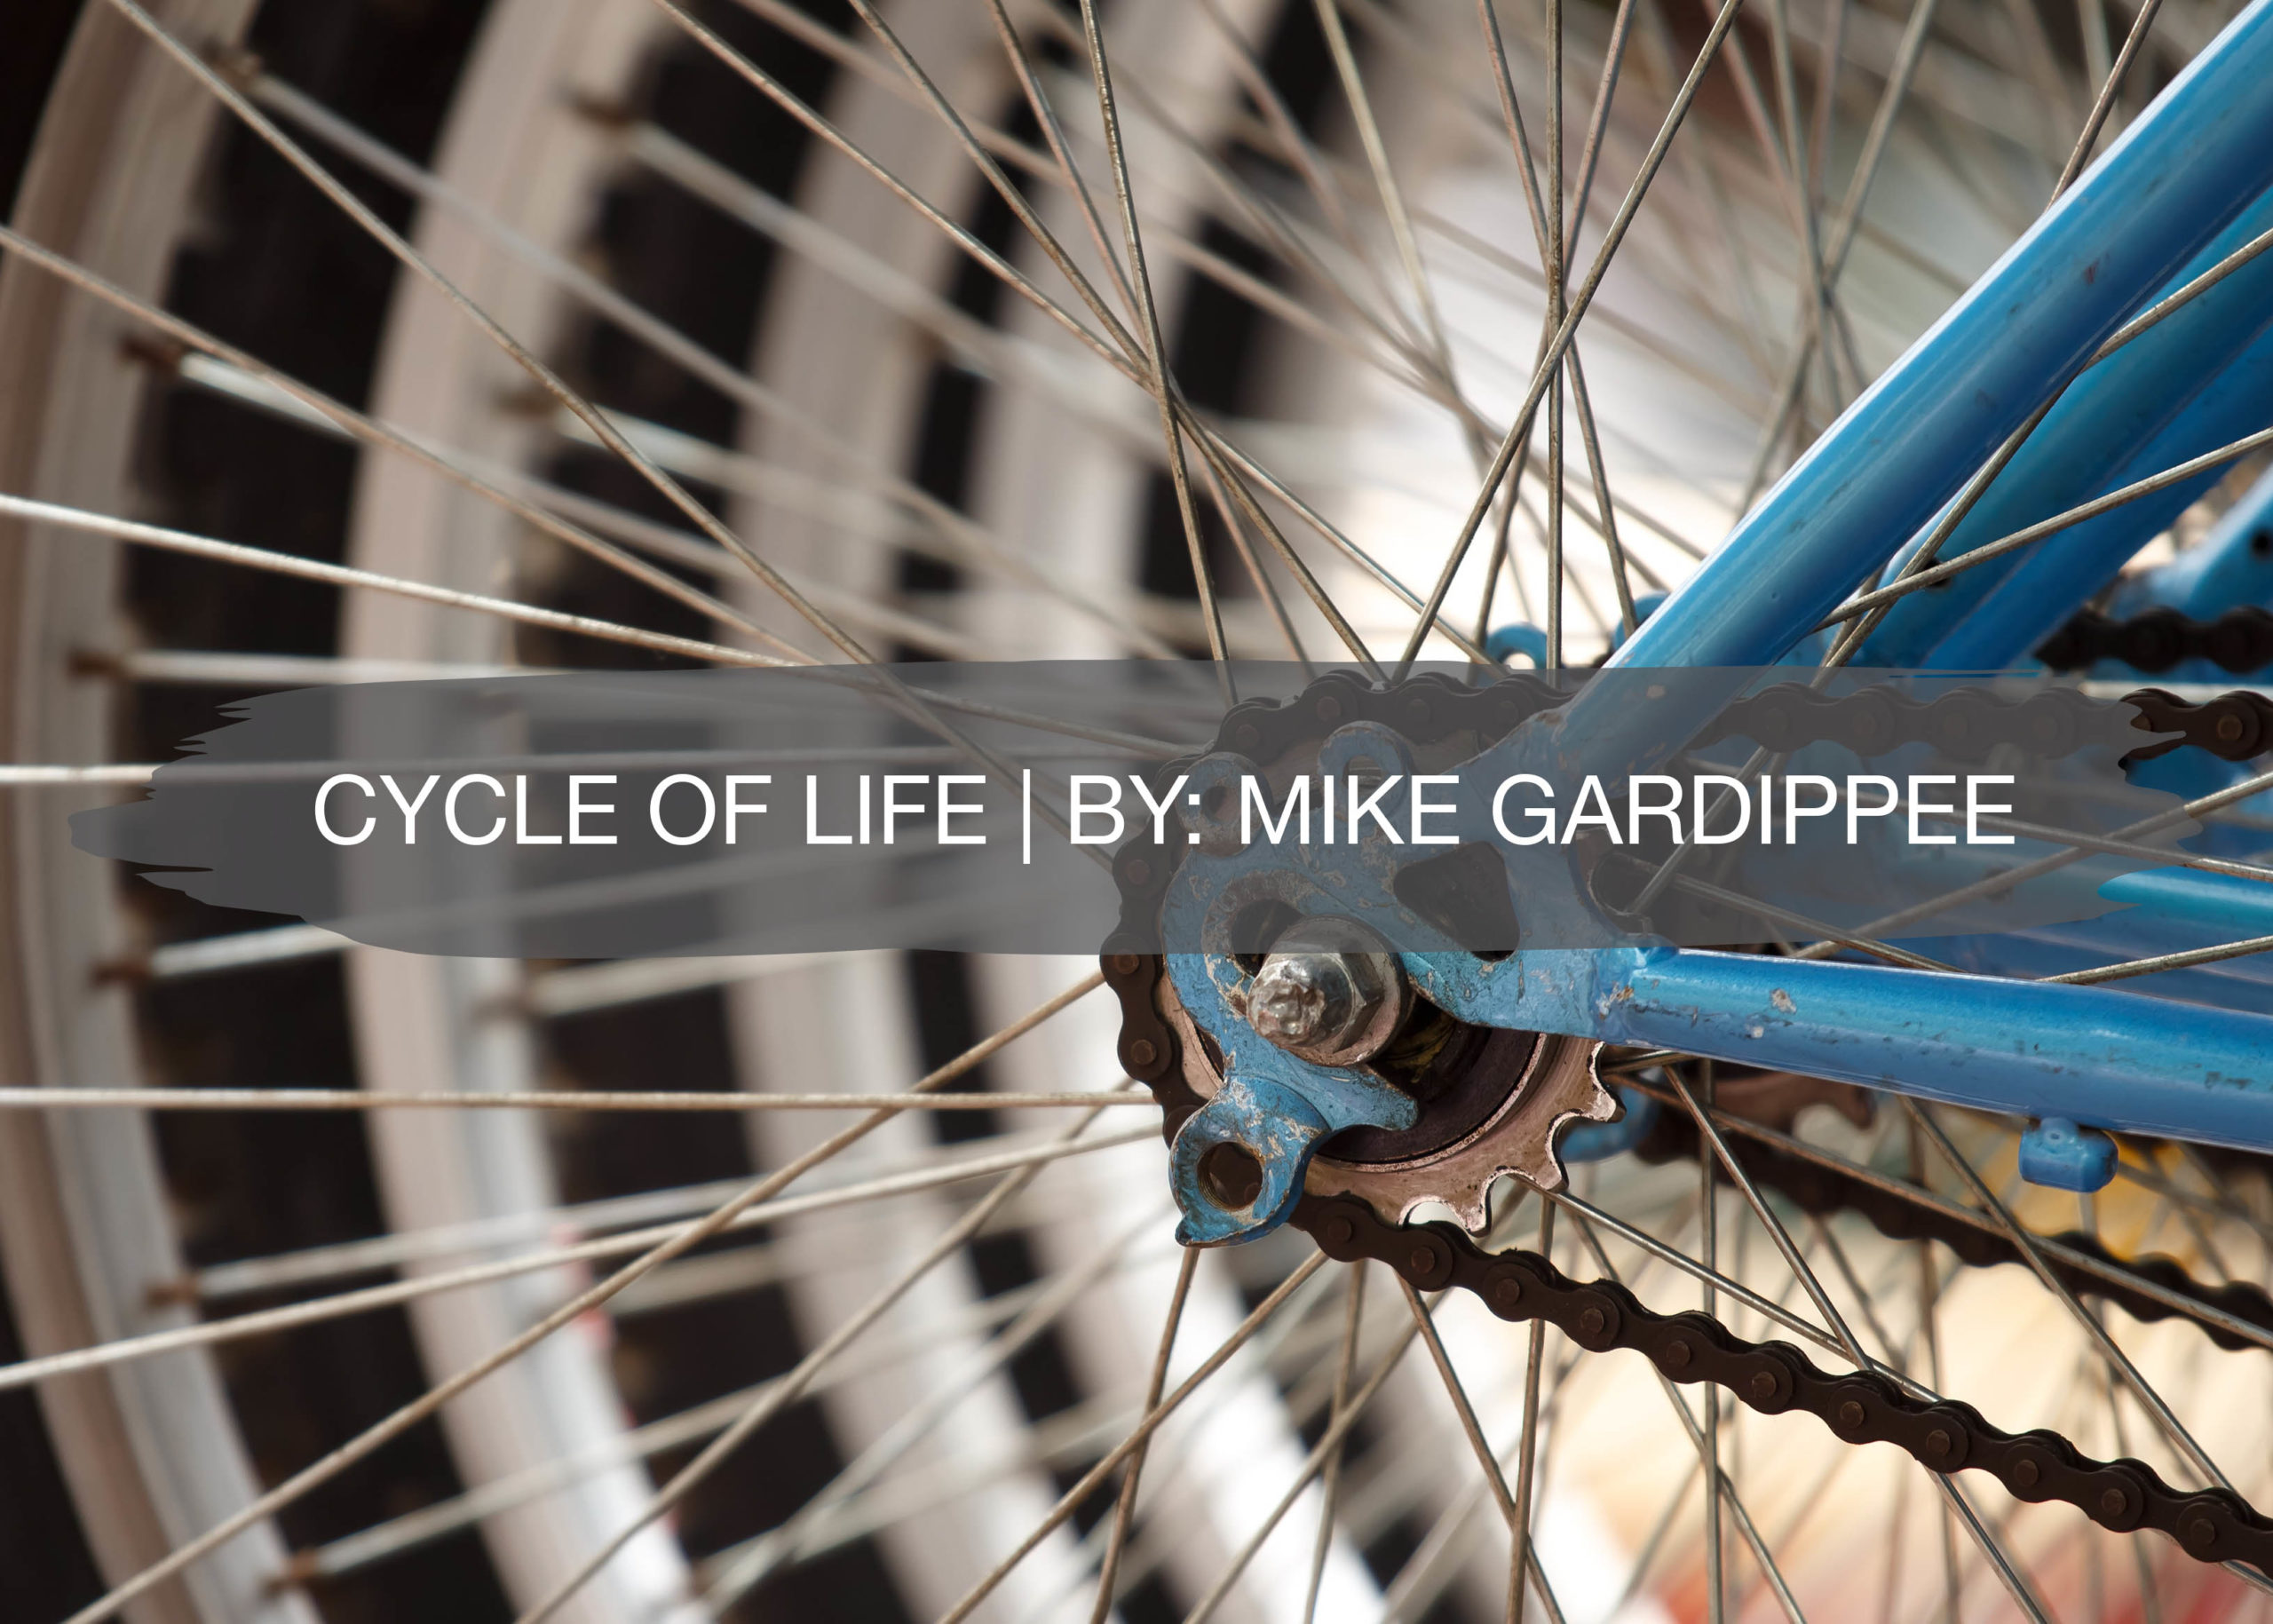 Cycle of Life | By: Mike Gardippee 1